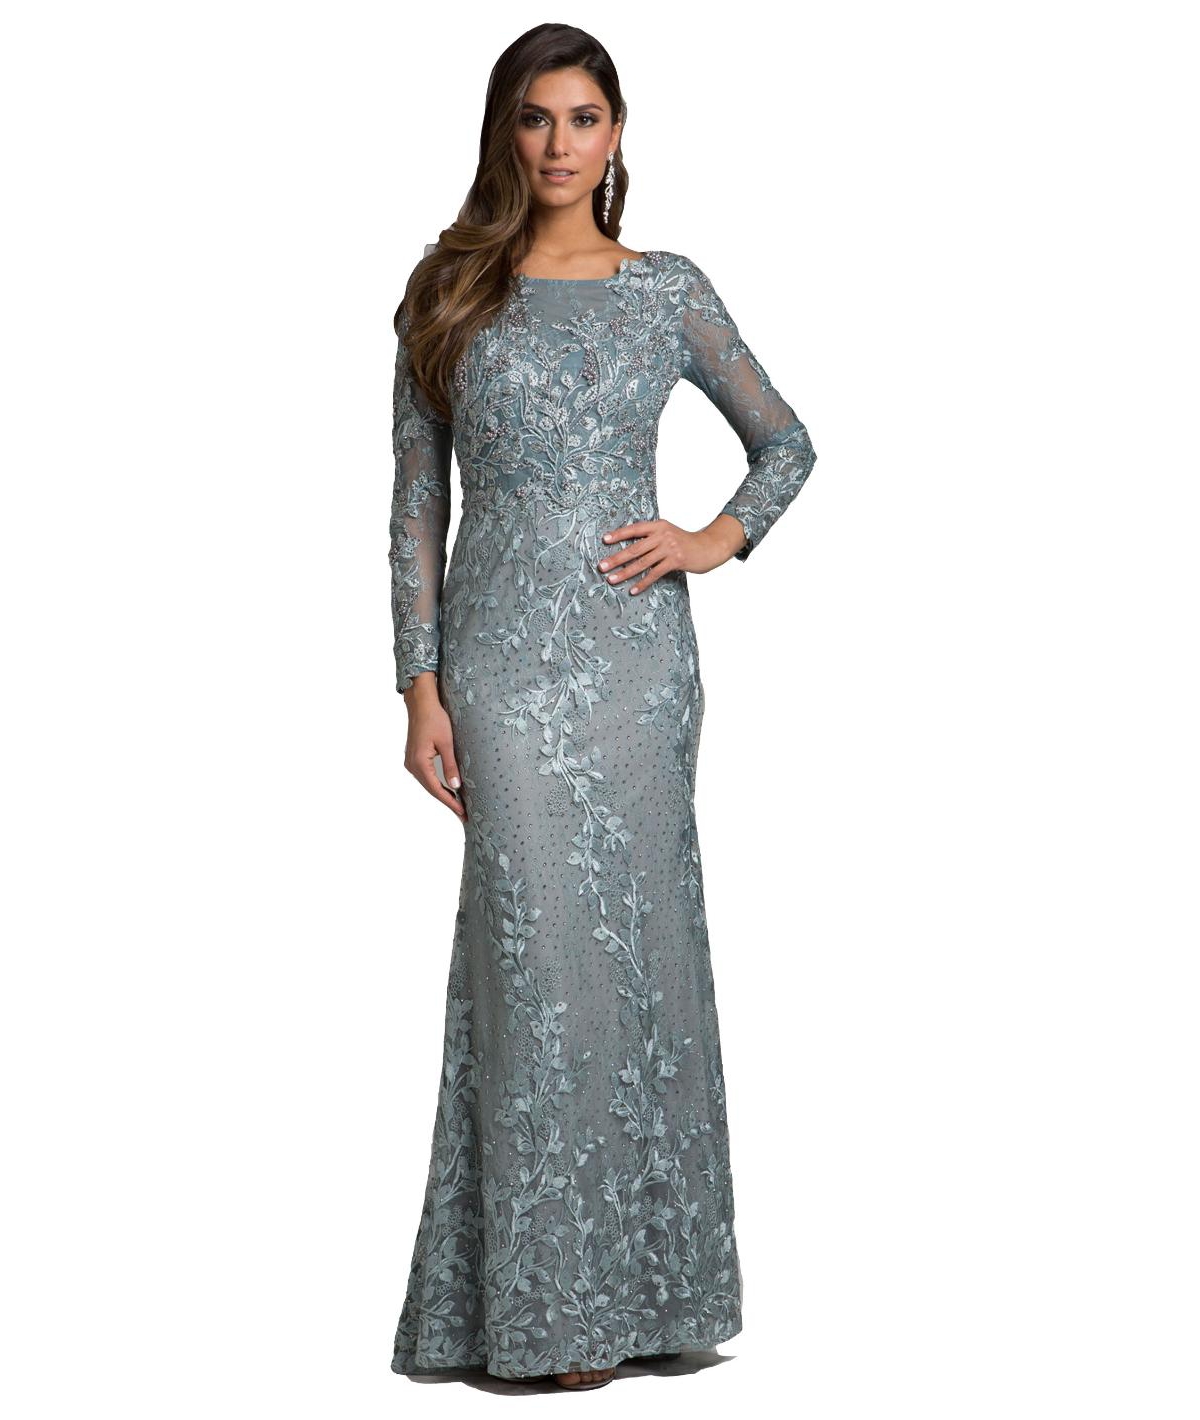 Women's Long Sleeve Lace Dress With Lace Appliques - Silver sage